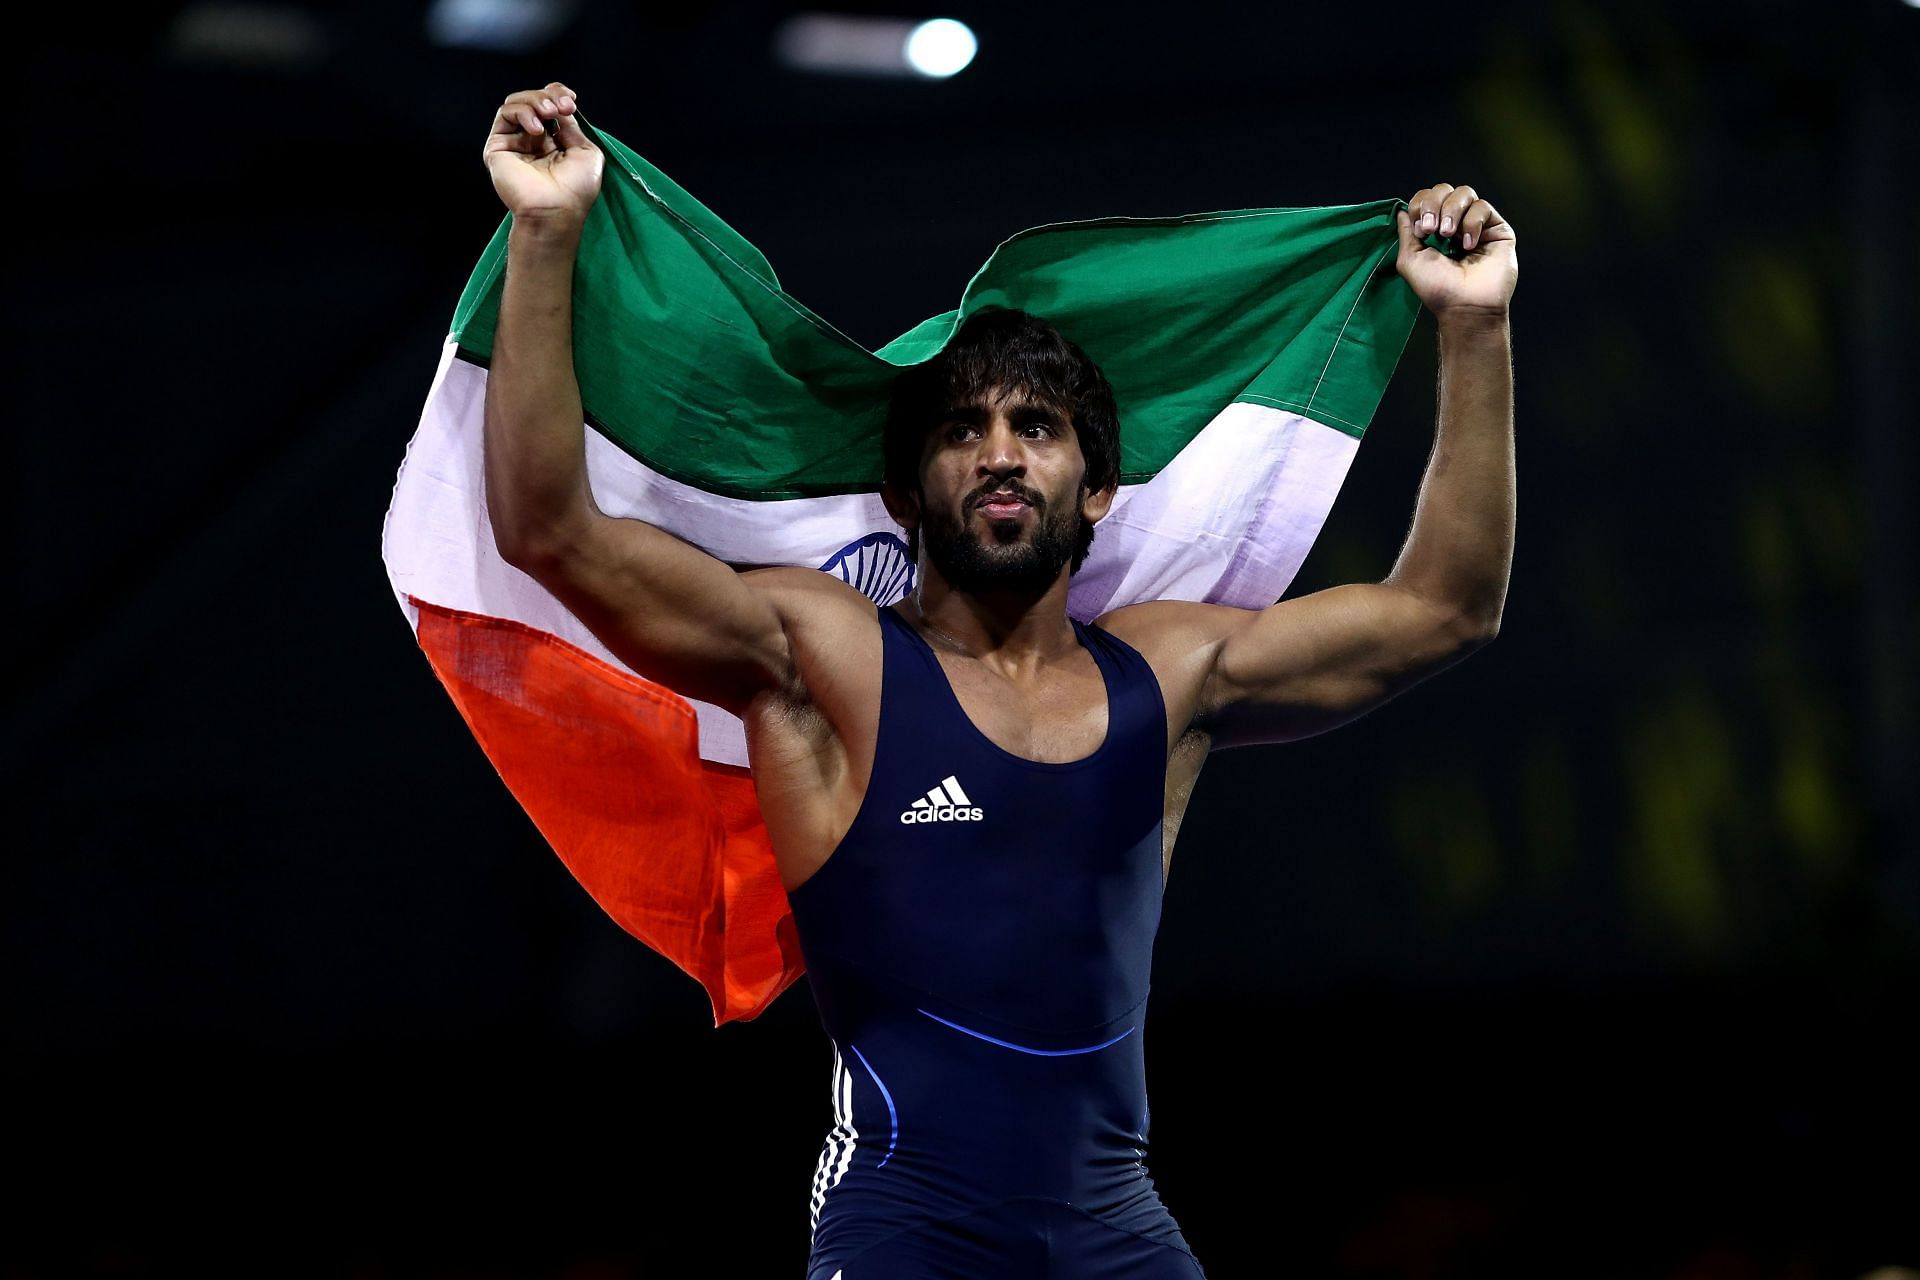 Bajrang Punia celebrates winning the gold medal at the 2018 Commonwealth Games. (Image courtesy: Getty)